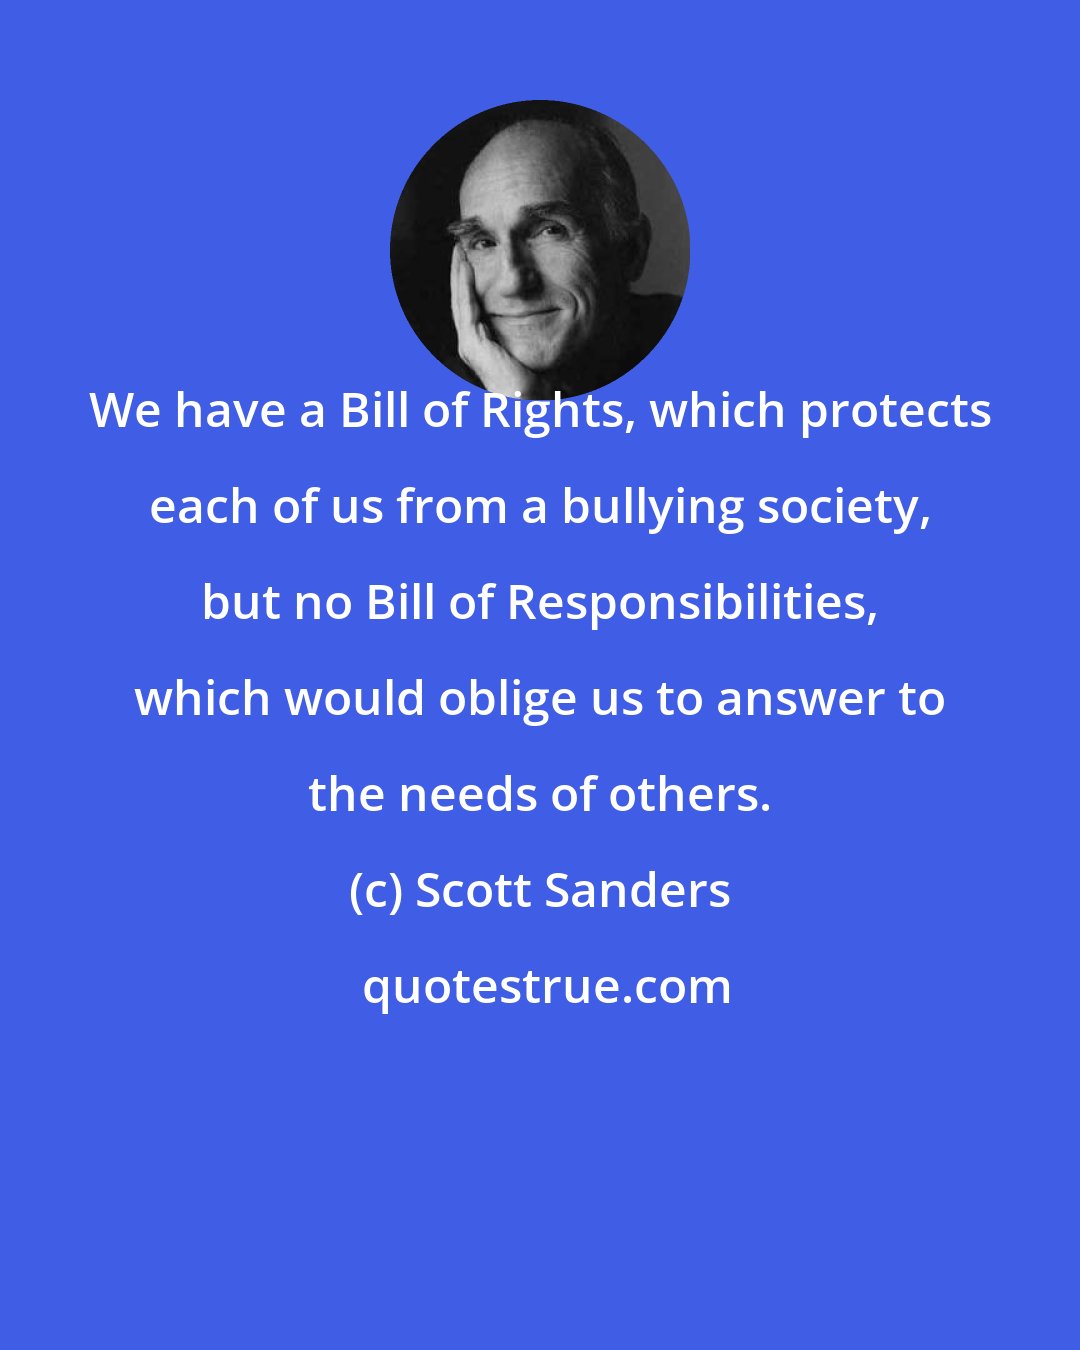 Scott Sanders: We have a Bill of Rights, which protects each of us from a bullying society, but no Bill of Responsibilities, which would oblige us to answer to the needs of others.